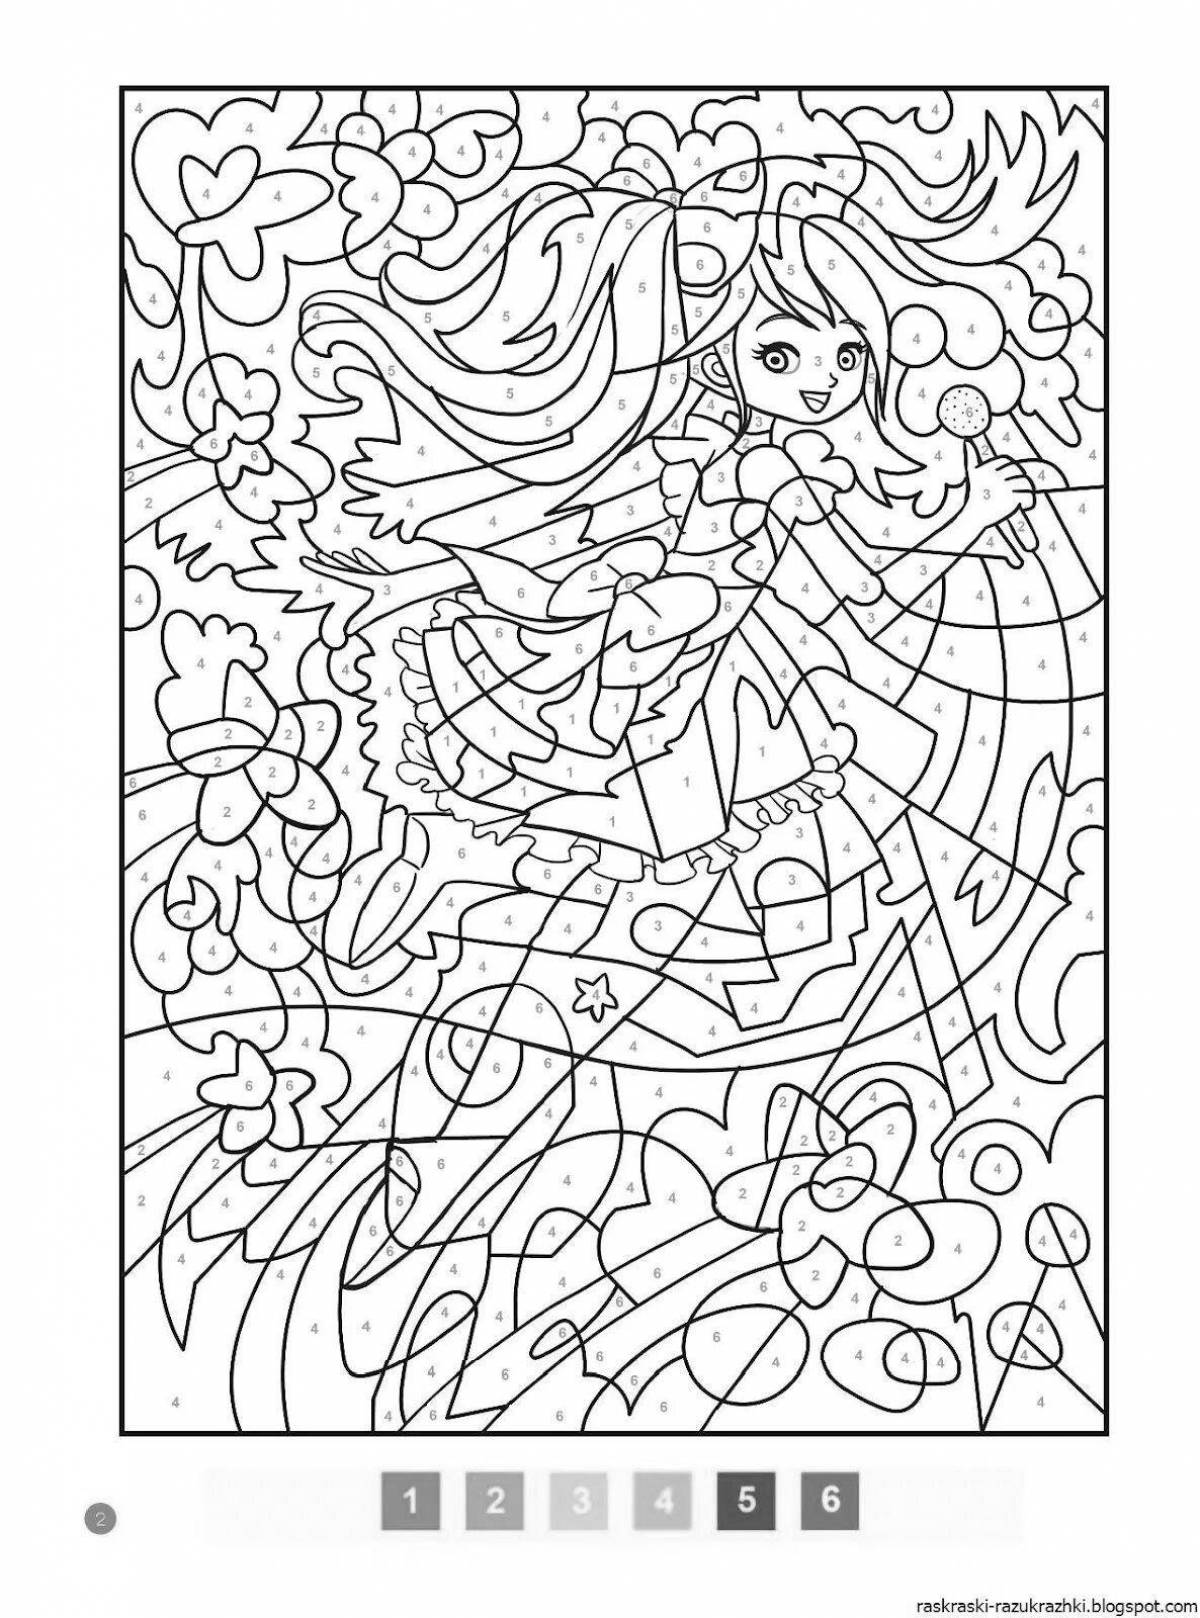 Complex coloring pages with page numbers